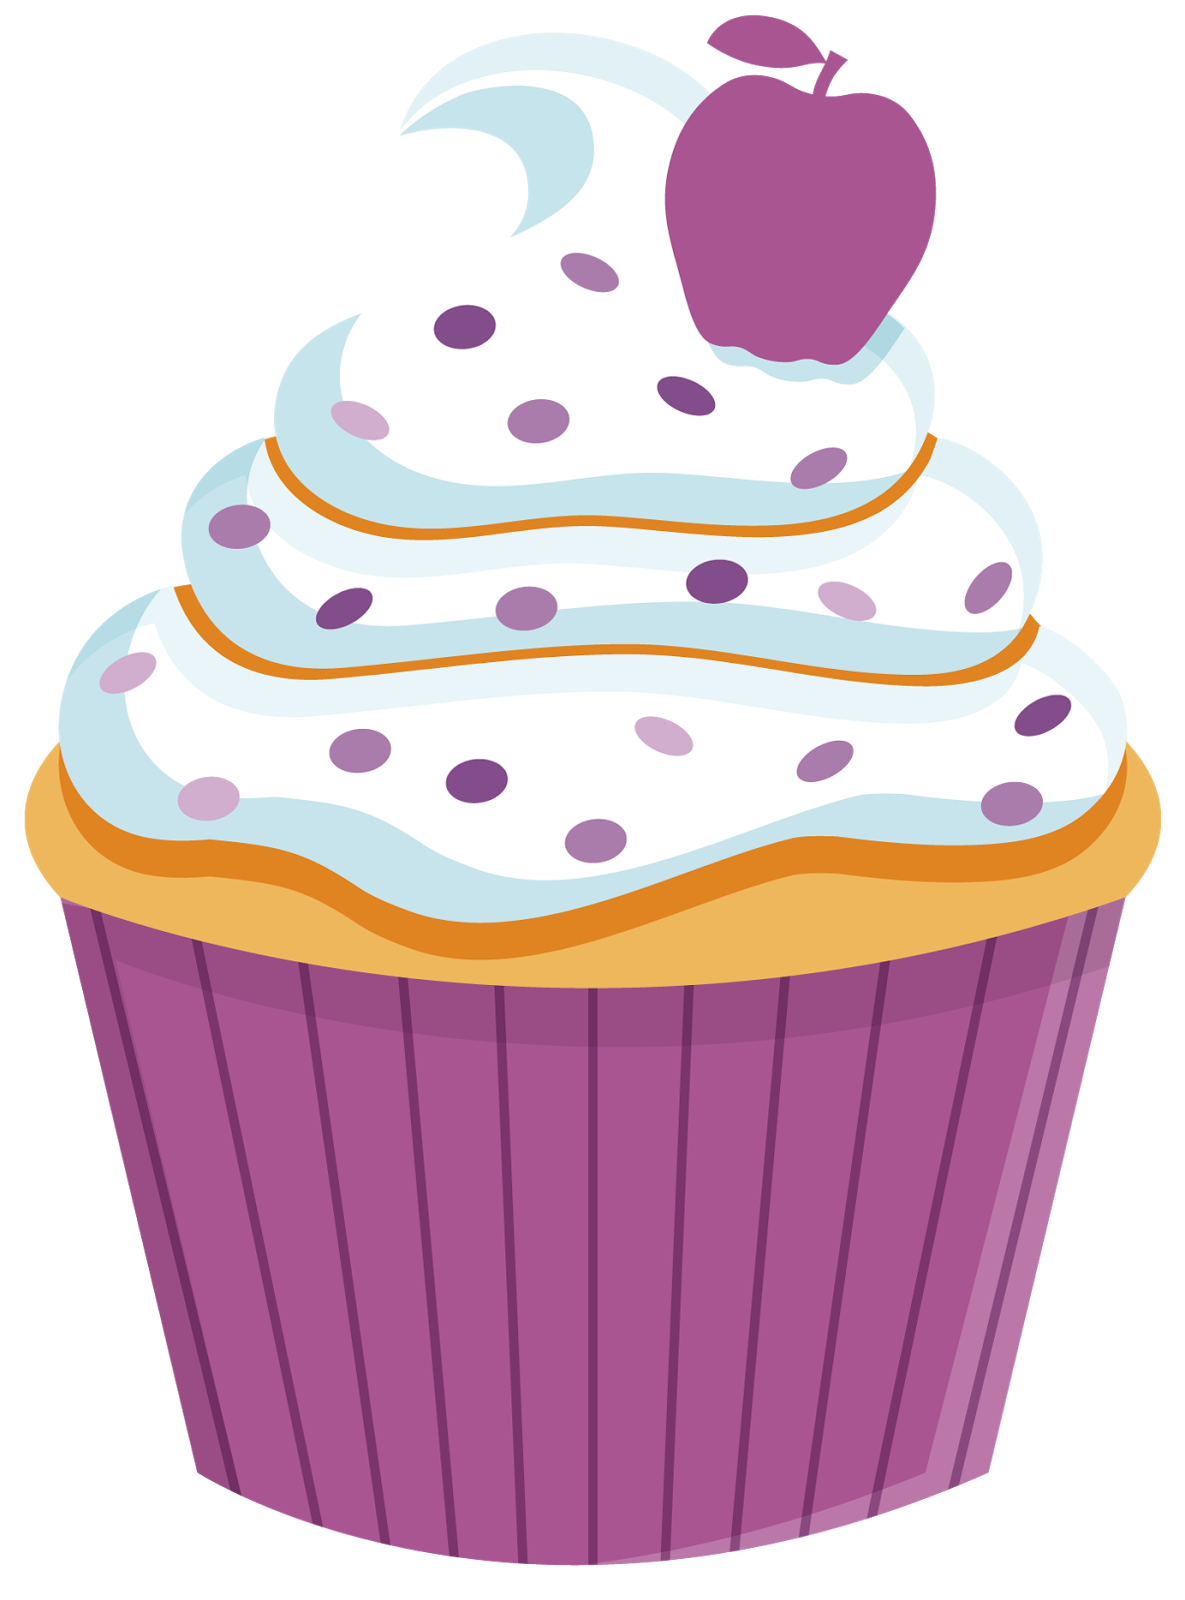 Yummy Cupcake PNG Clipart